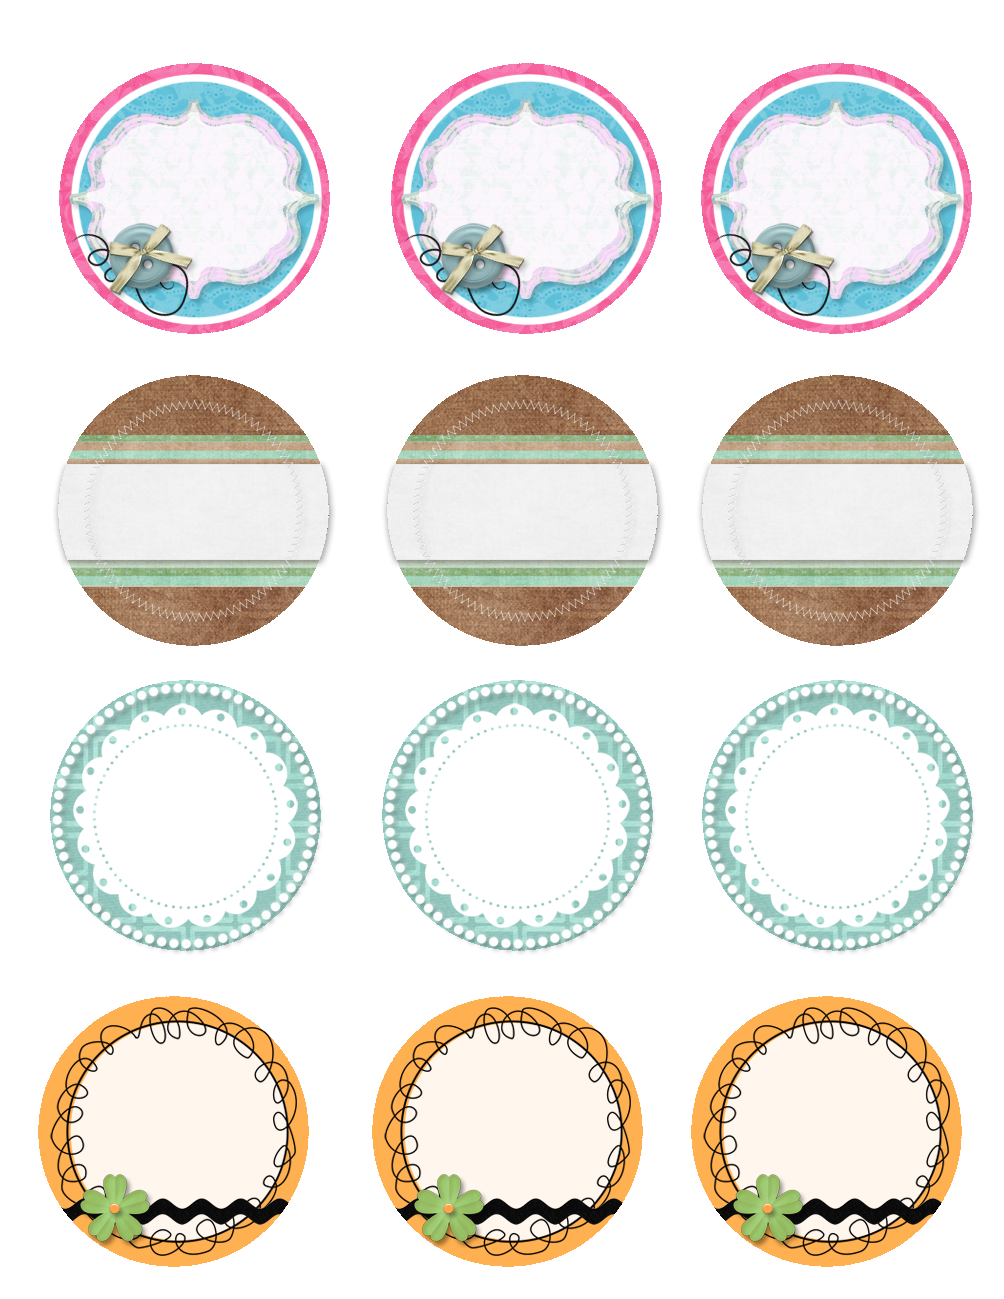 56 Cute Mason Jar Labels | Kittybabylove - Free Printable Labels For Jars